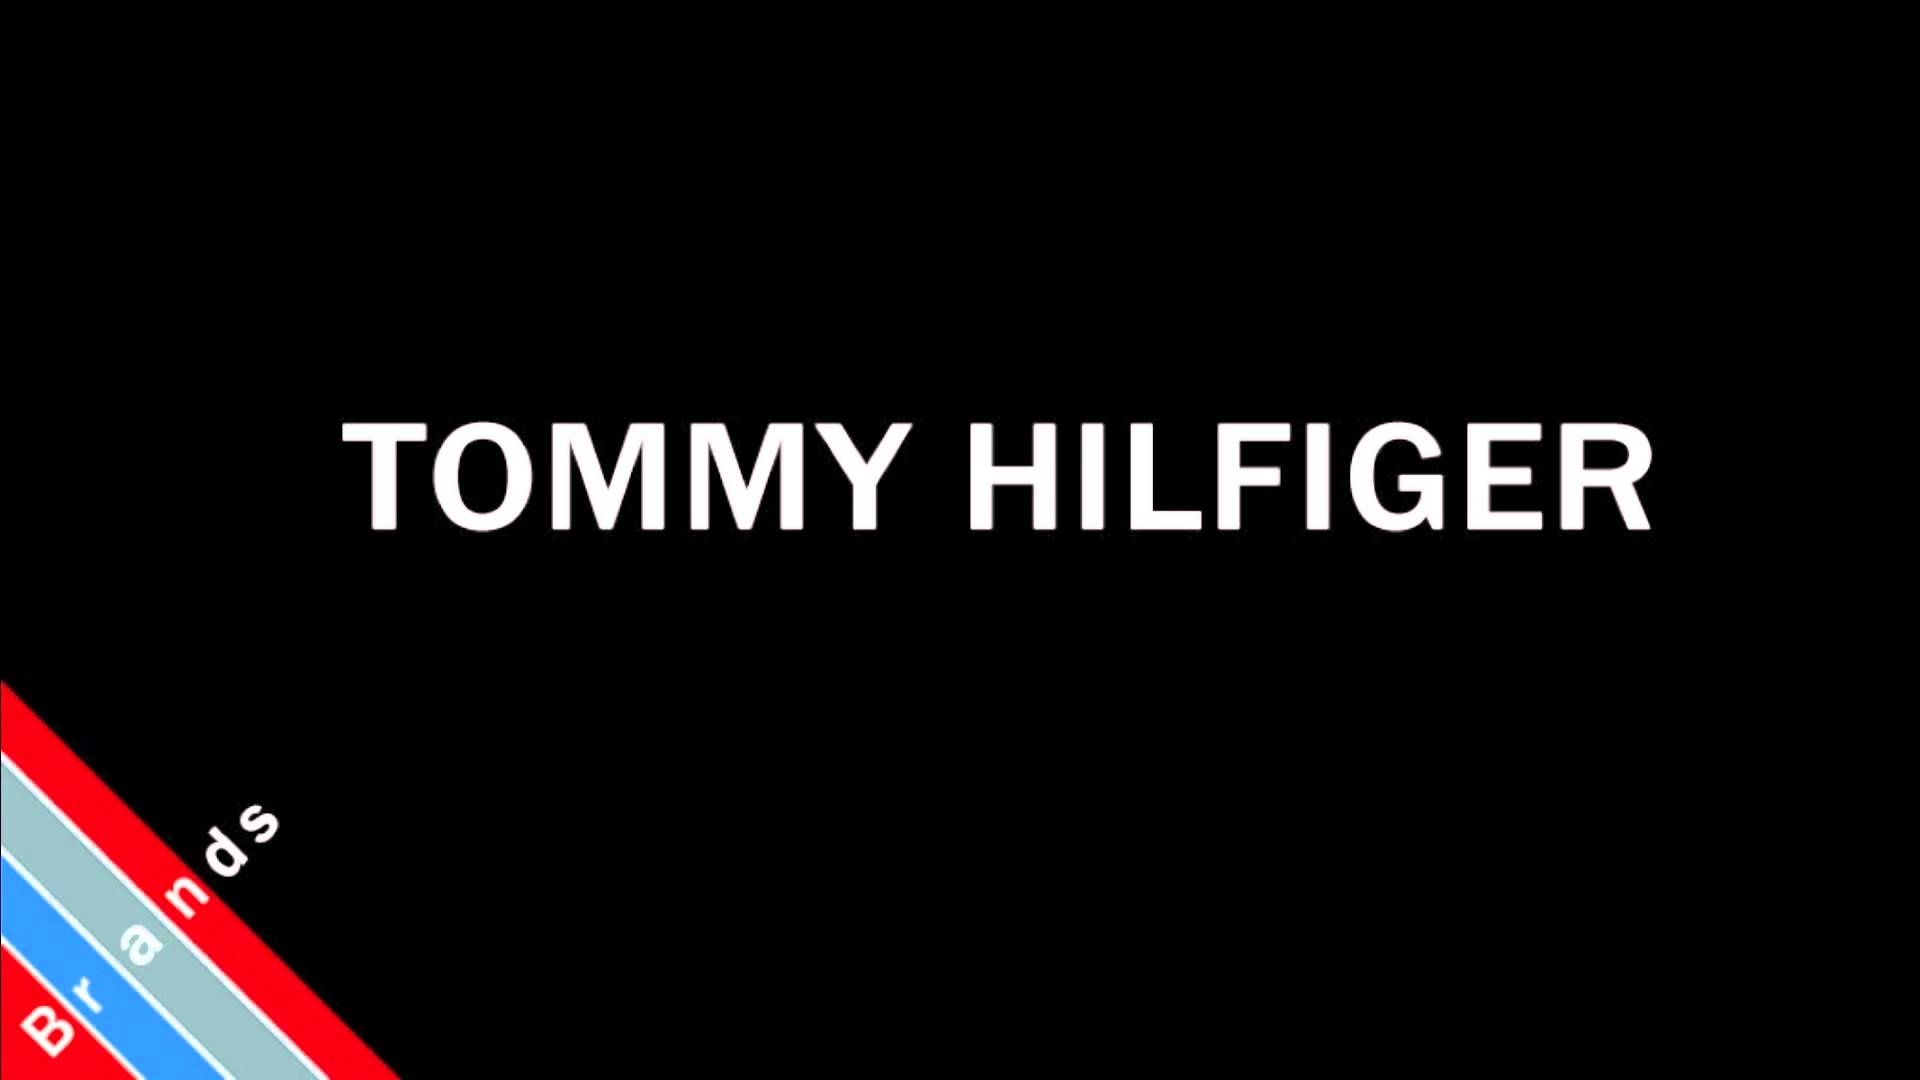 Tommy Hilfiger: A global apparel and retail company, Delivers premium styling, quality, and value. 1920x1080 Full HD Wallpaper.